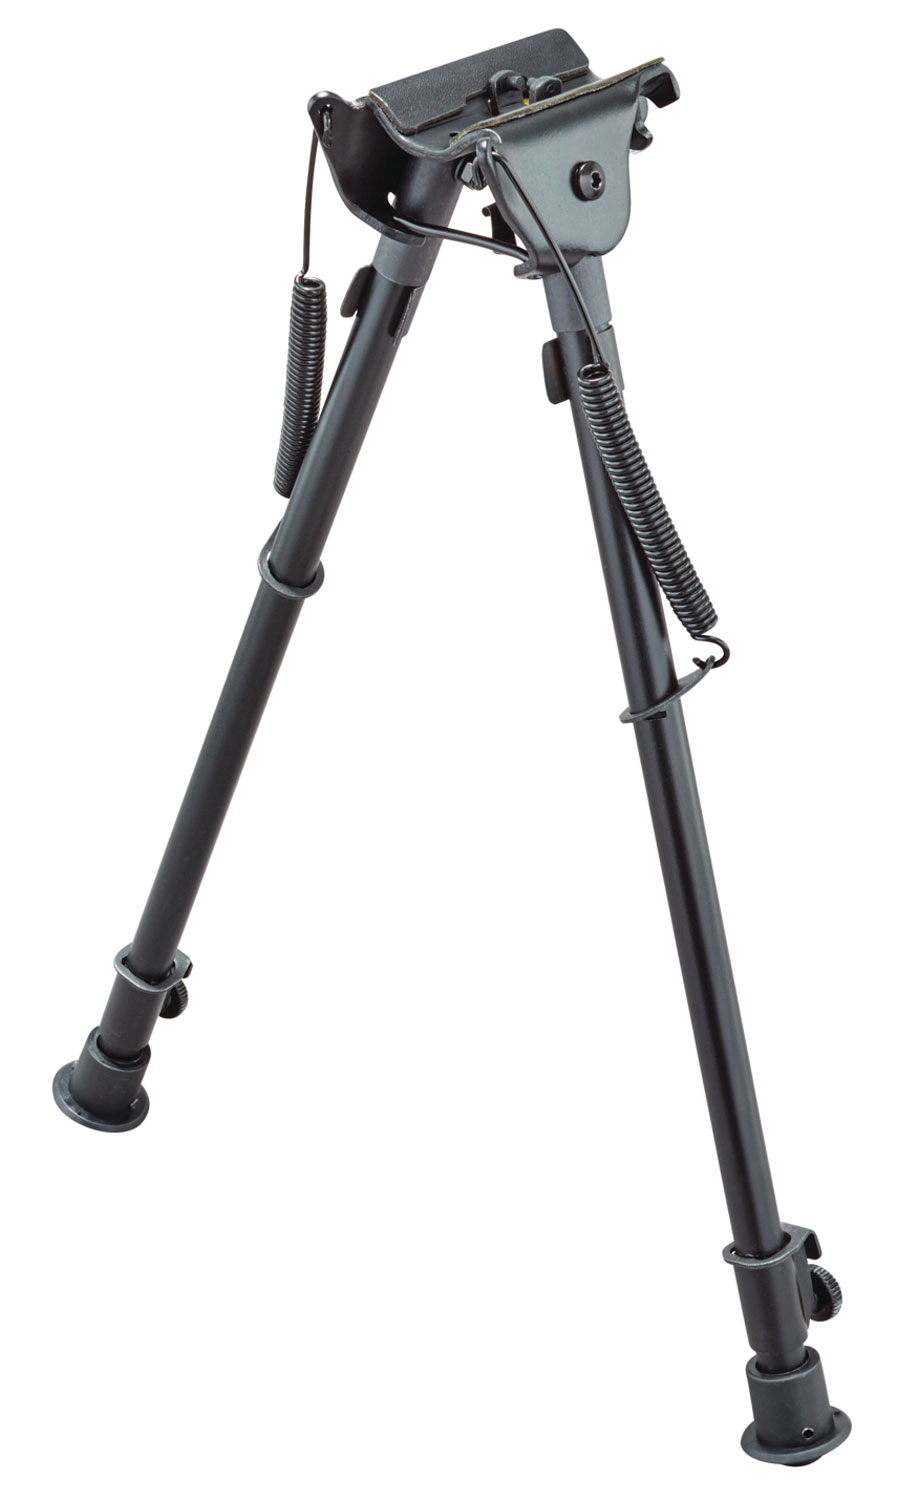 Champion Targets 40854 Standard Bipod made of Black Aluminum with Swivel Stud Attachment & 6-9